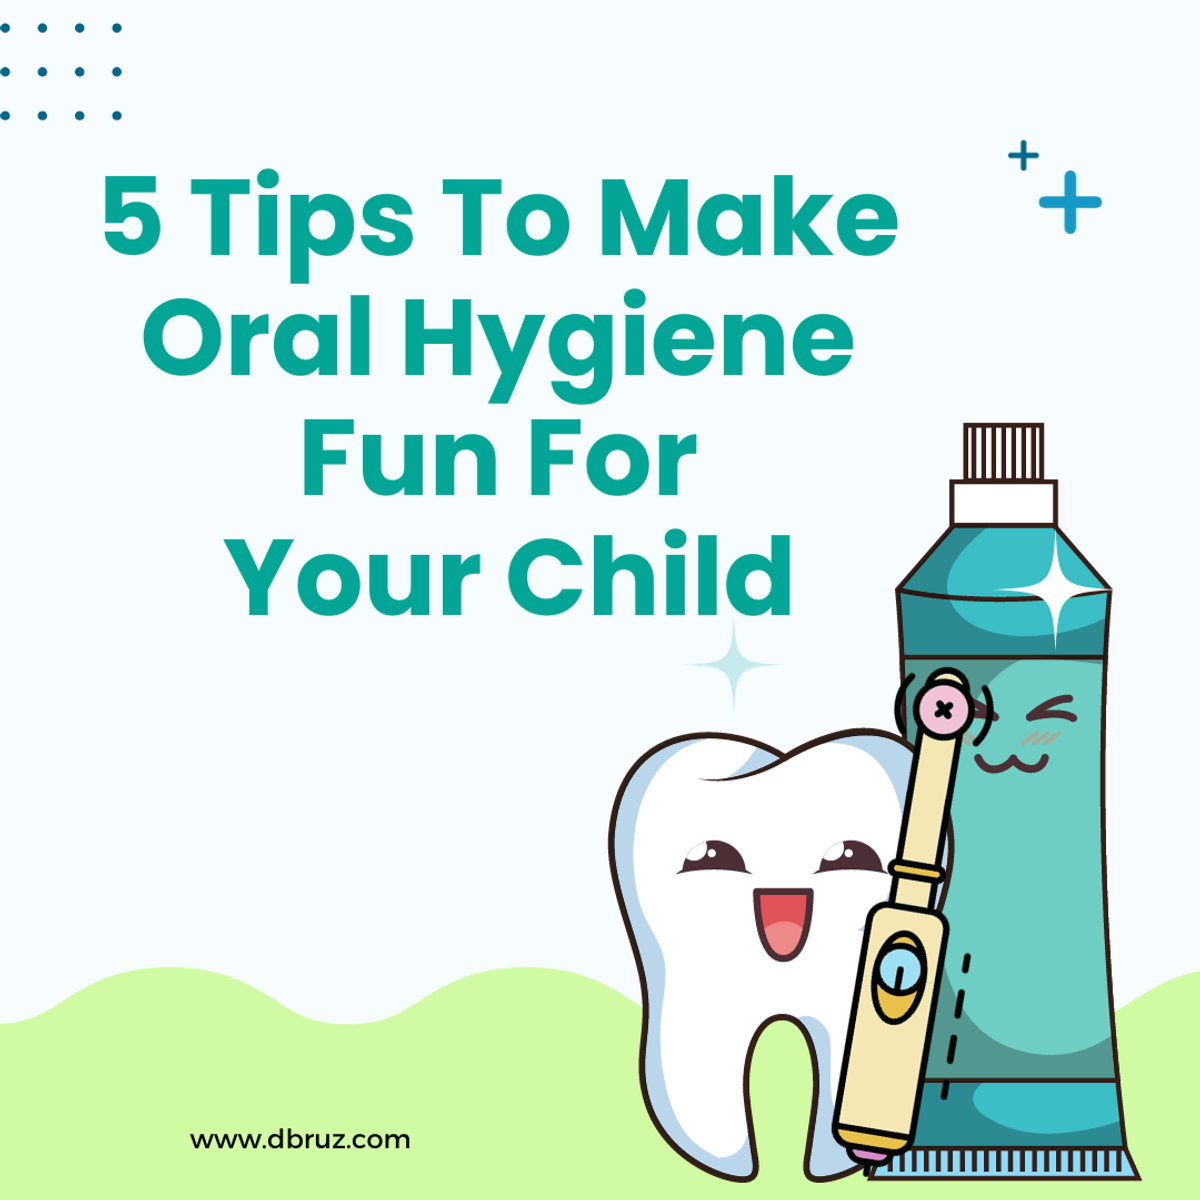 5 Tips To Make Oral Hygiene Fun For Your Child with Dbruz Sonic Toothbrush